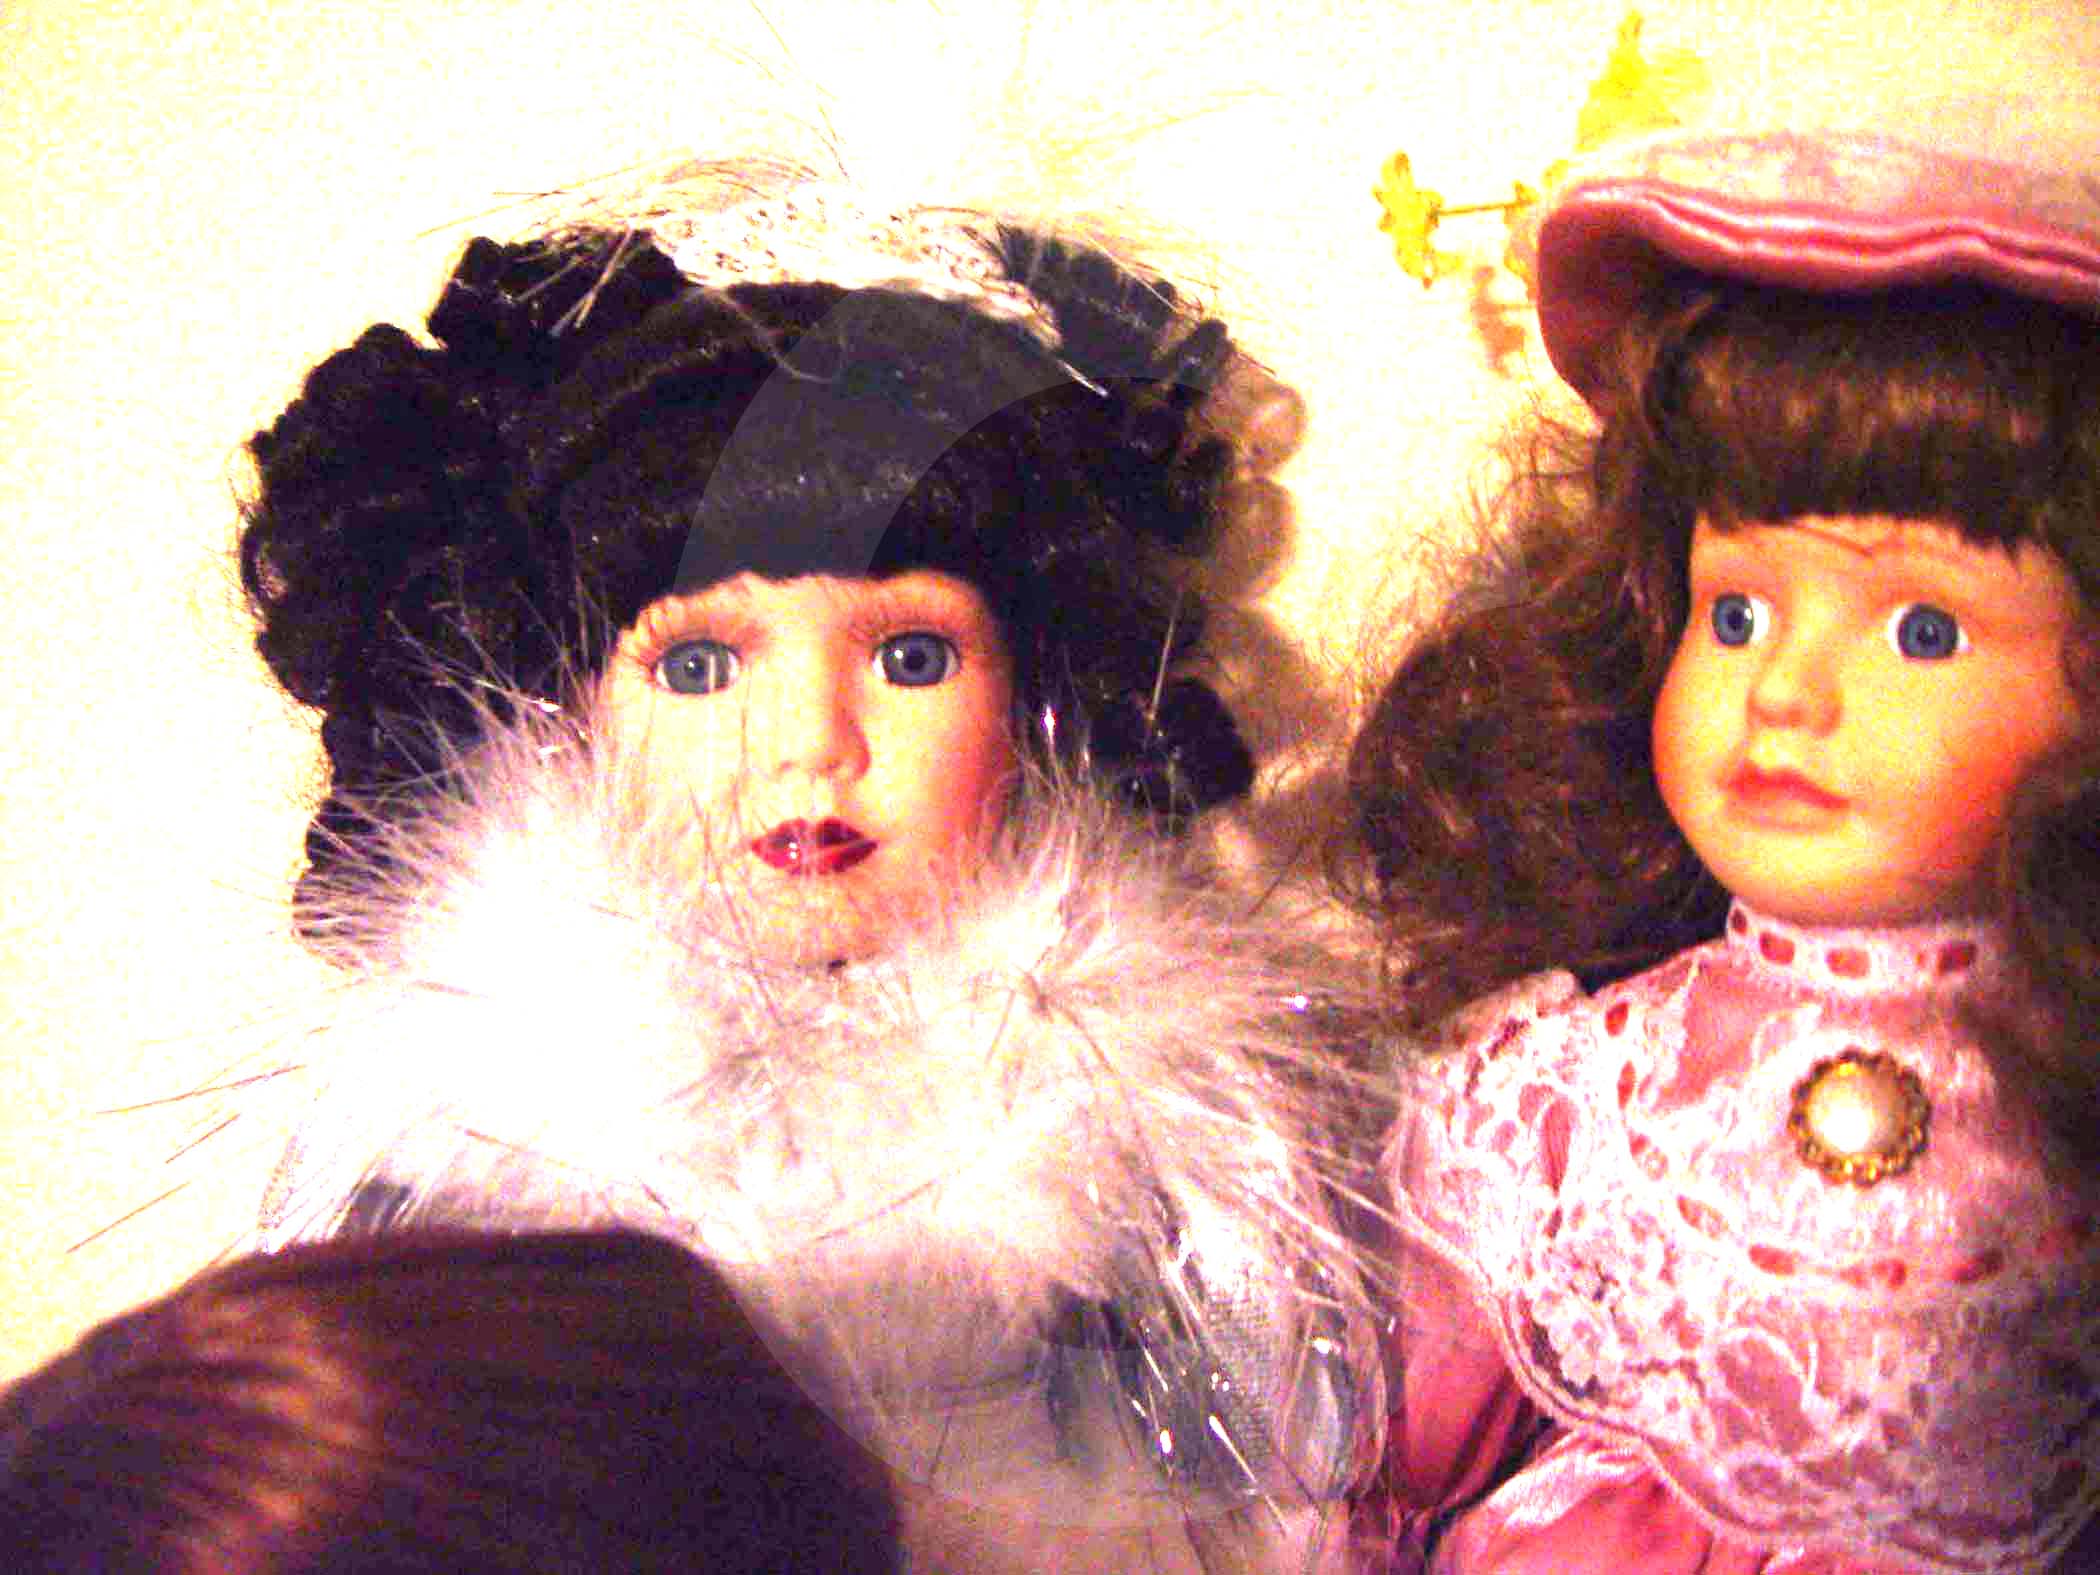 art, horror art,toys haunted,possessed objects,dolls,barbies,clowns,cats,paranormal art,paintings,psychic documentary